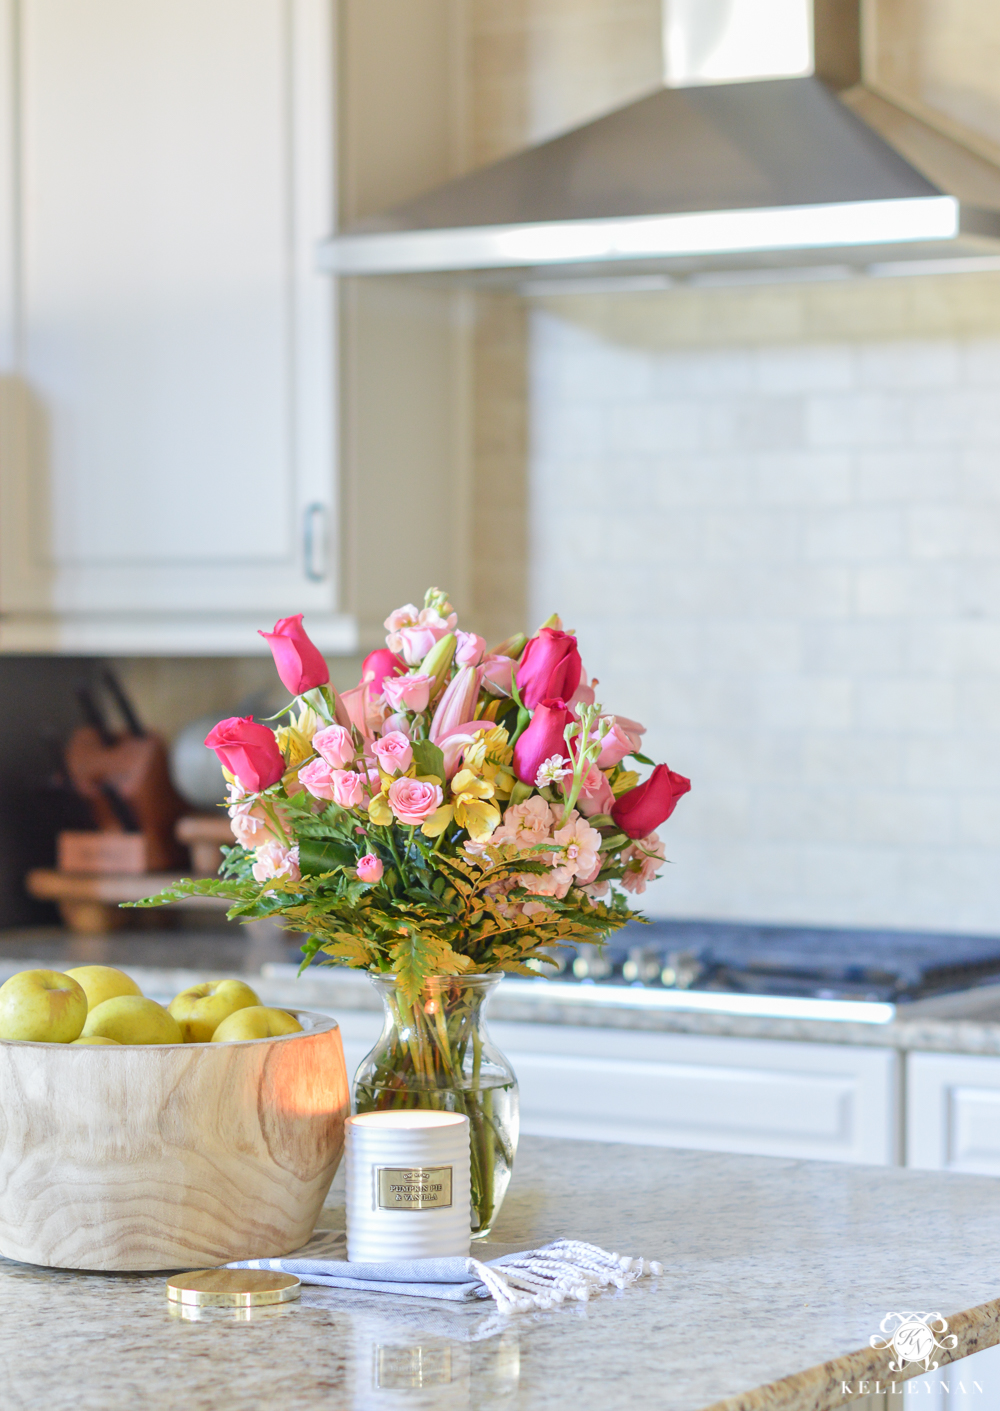 Kitchen island flowers with basket of apples